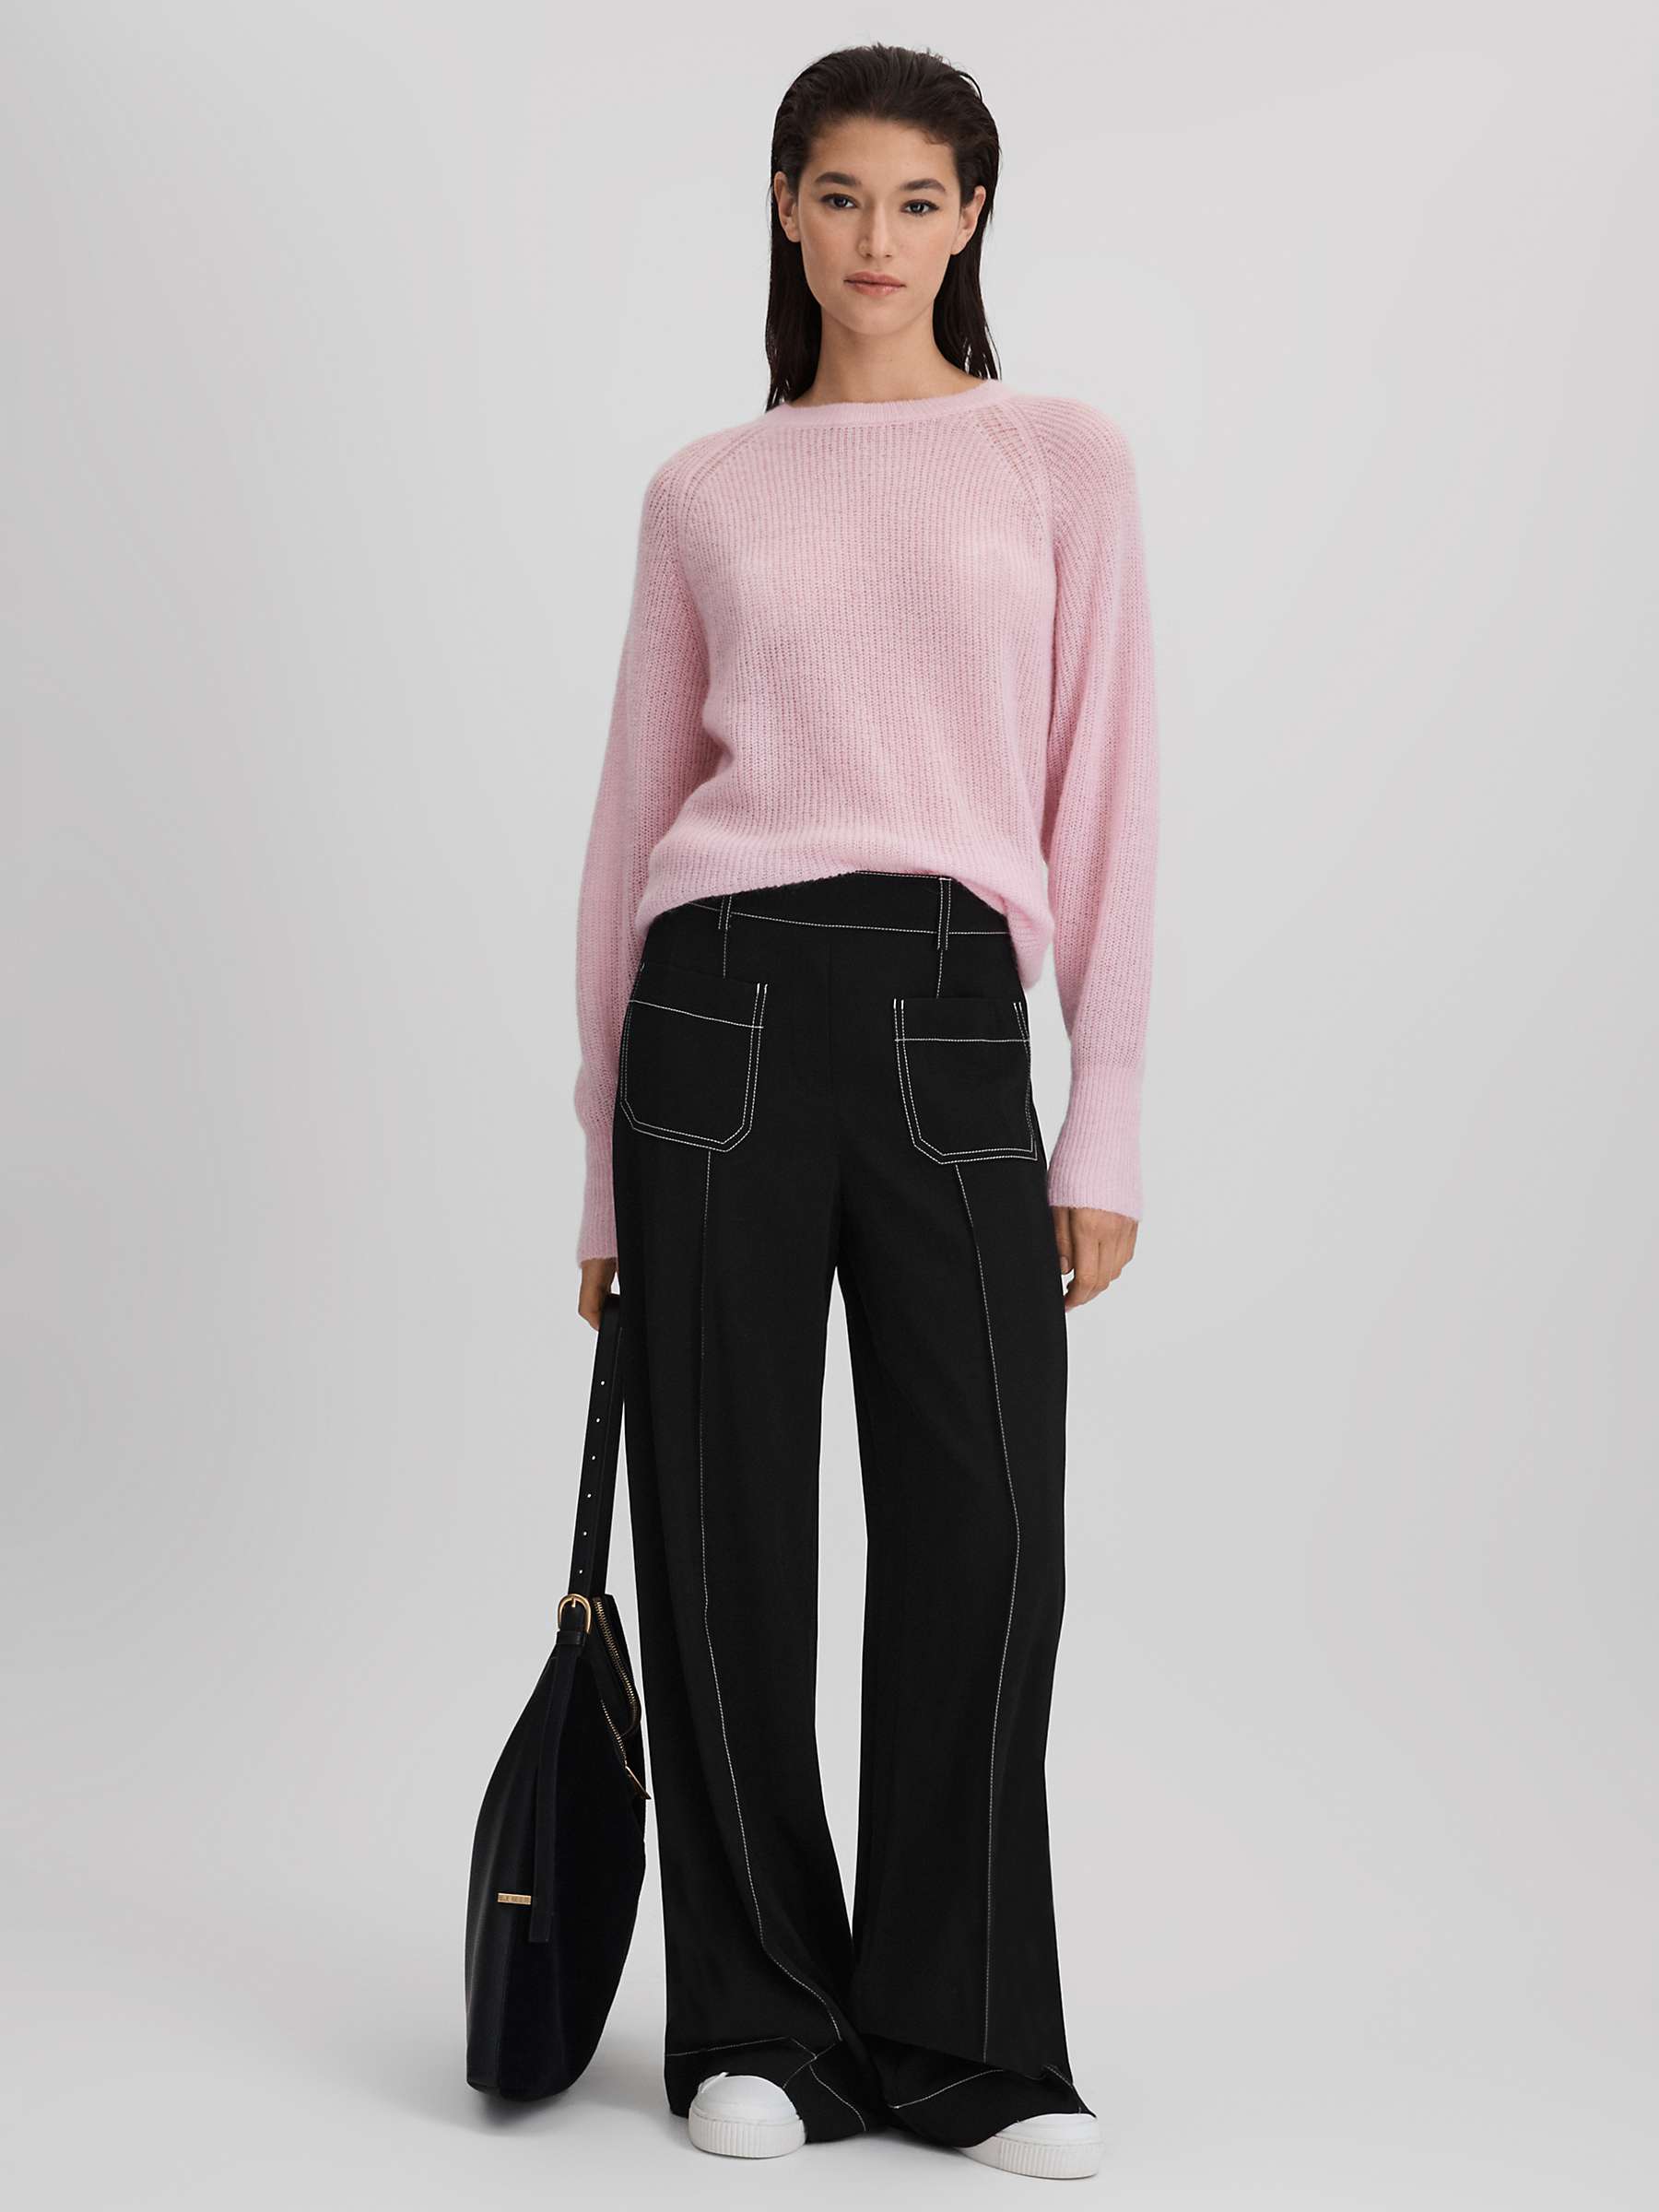 Buy Reiss Kylie Contrast Stitch Detail Wide Leg Trousers, Black Online at johnlewis.com